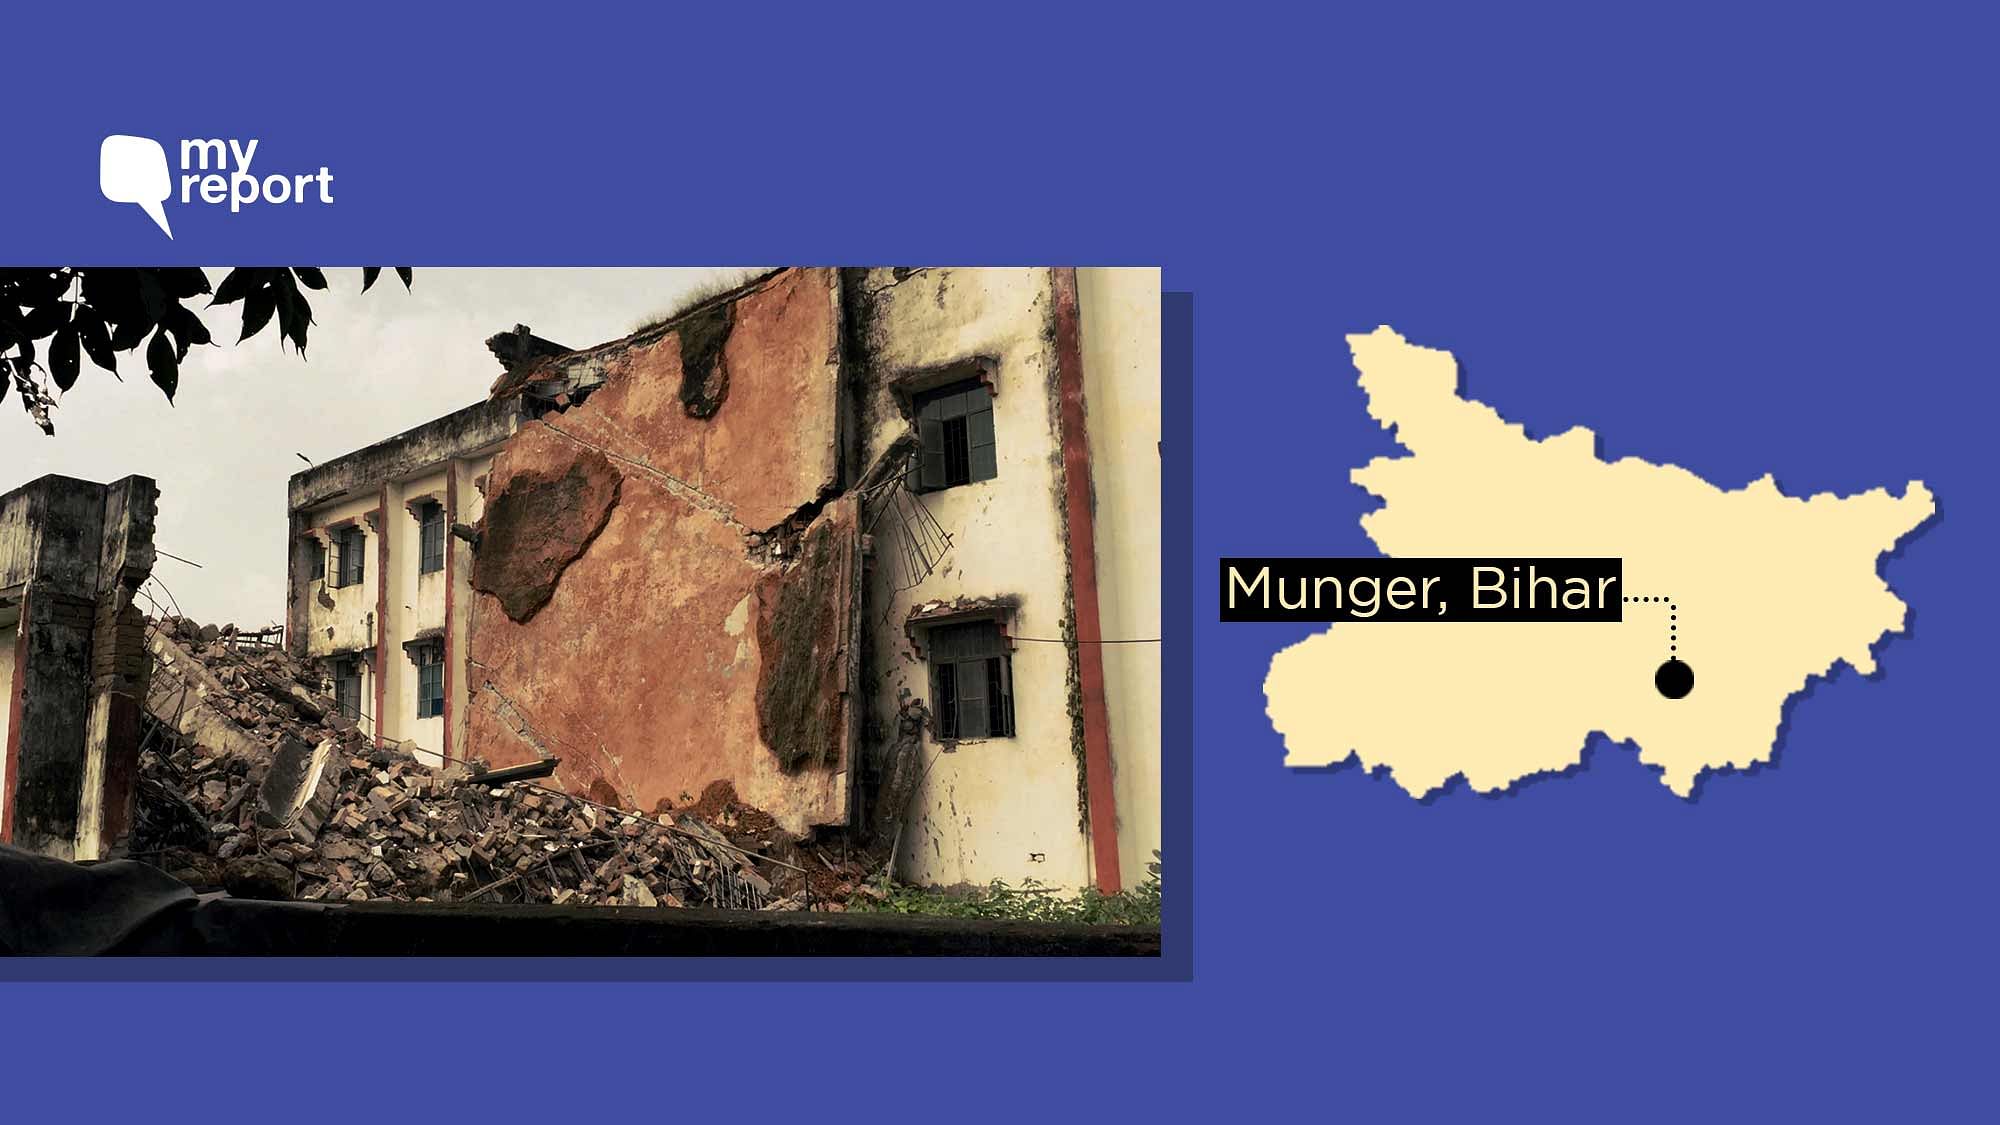 A minority hostel building in Bihar’s Munger district collapsed on 26 September.